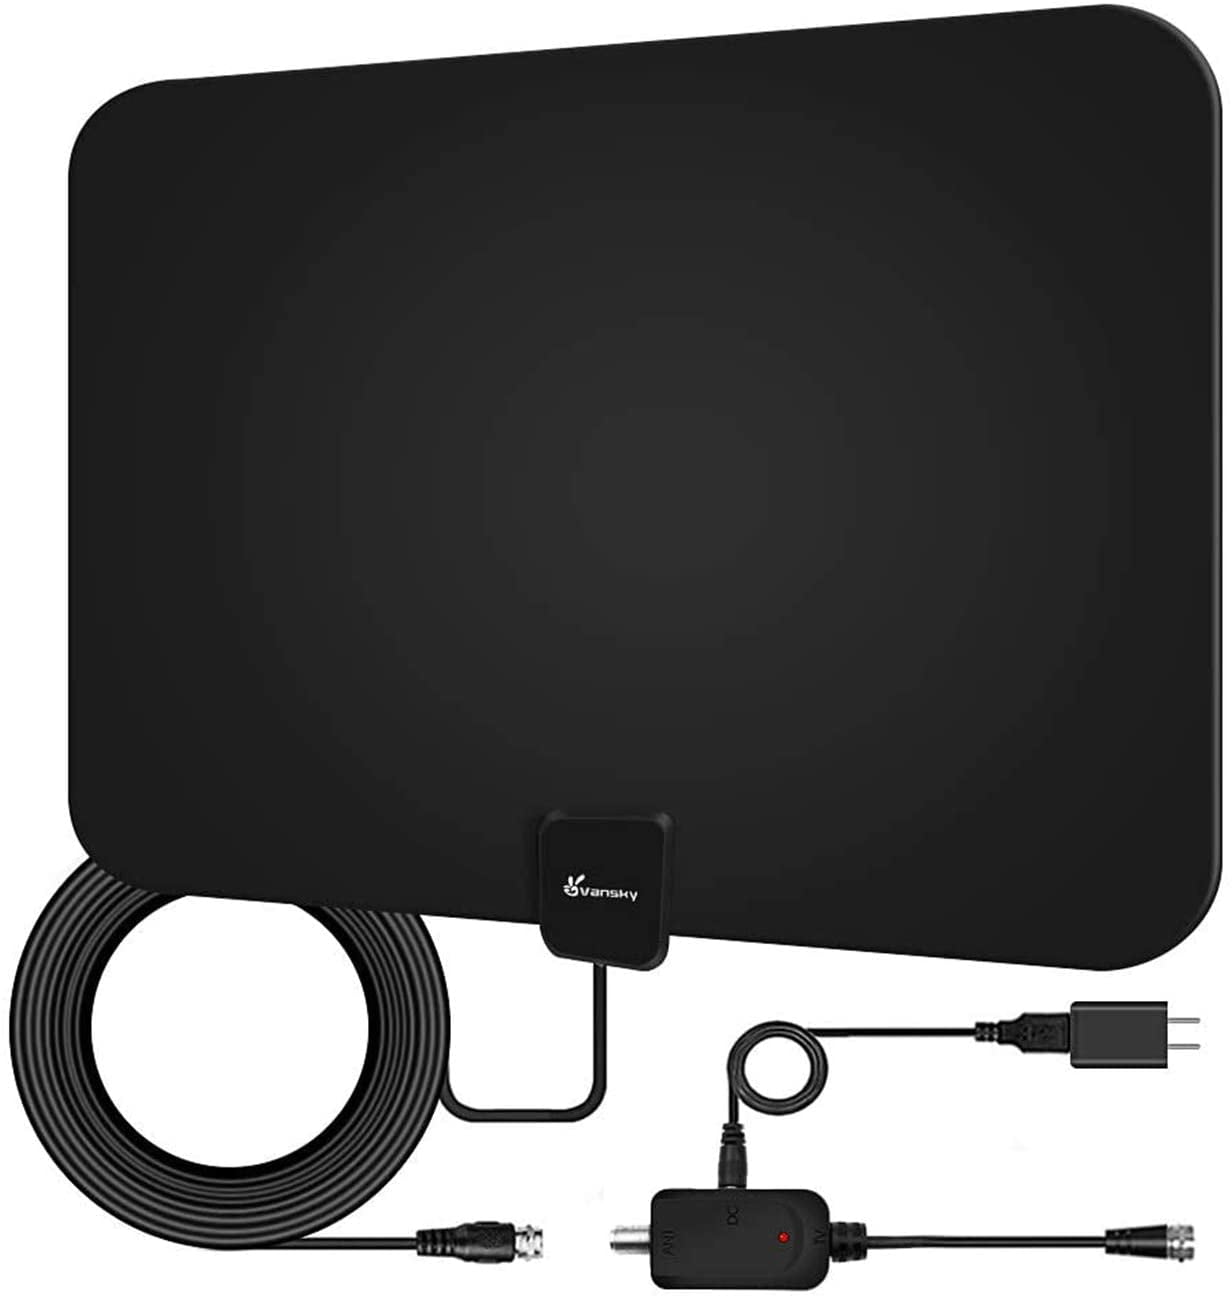 360° Reception Omni-directional Amplified Indoor/Outdoor HDTV Antenna Up 120Mile 